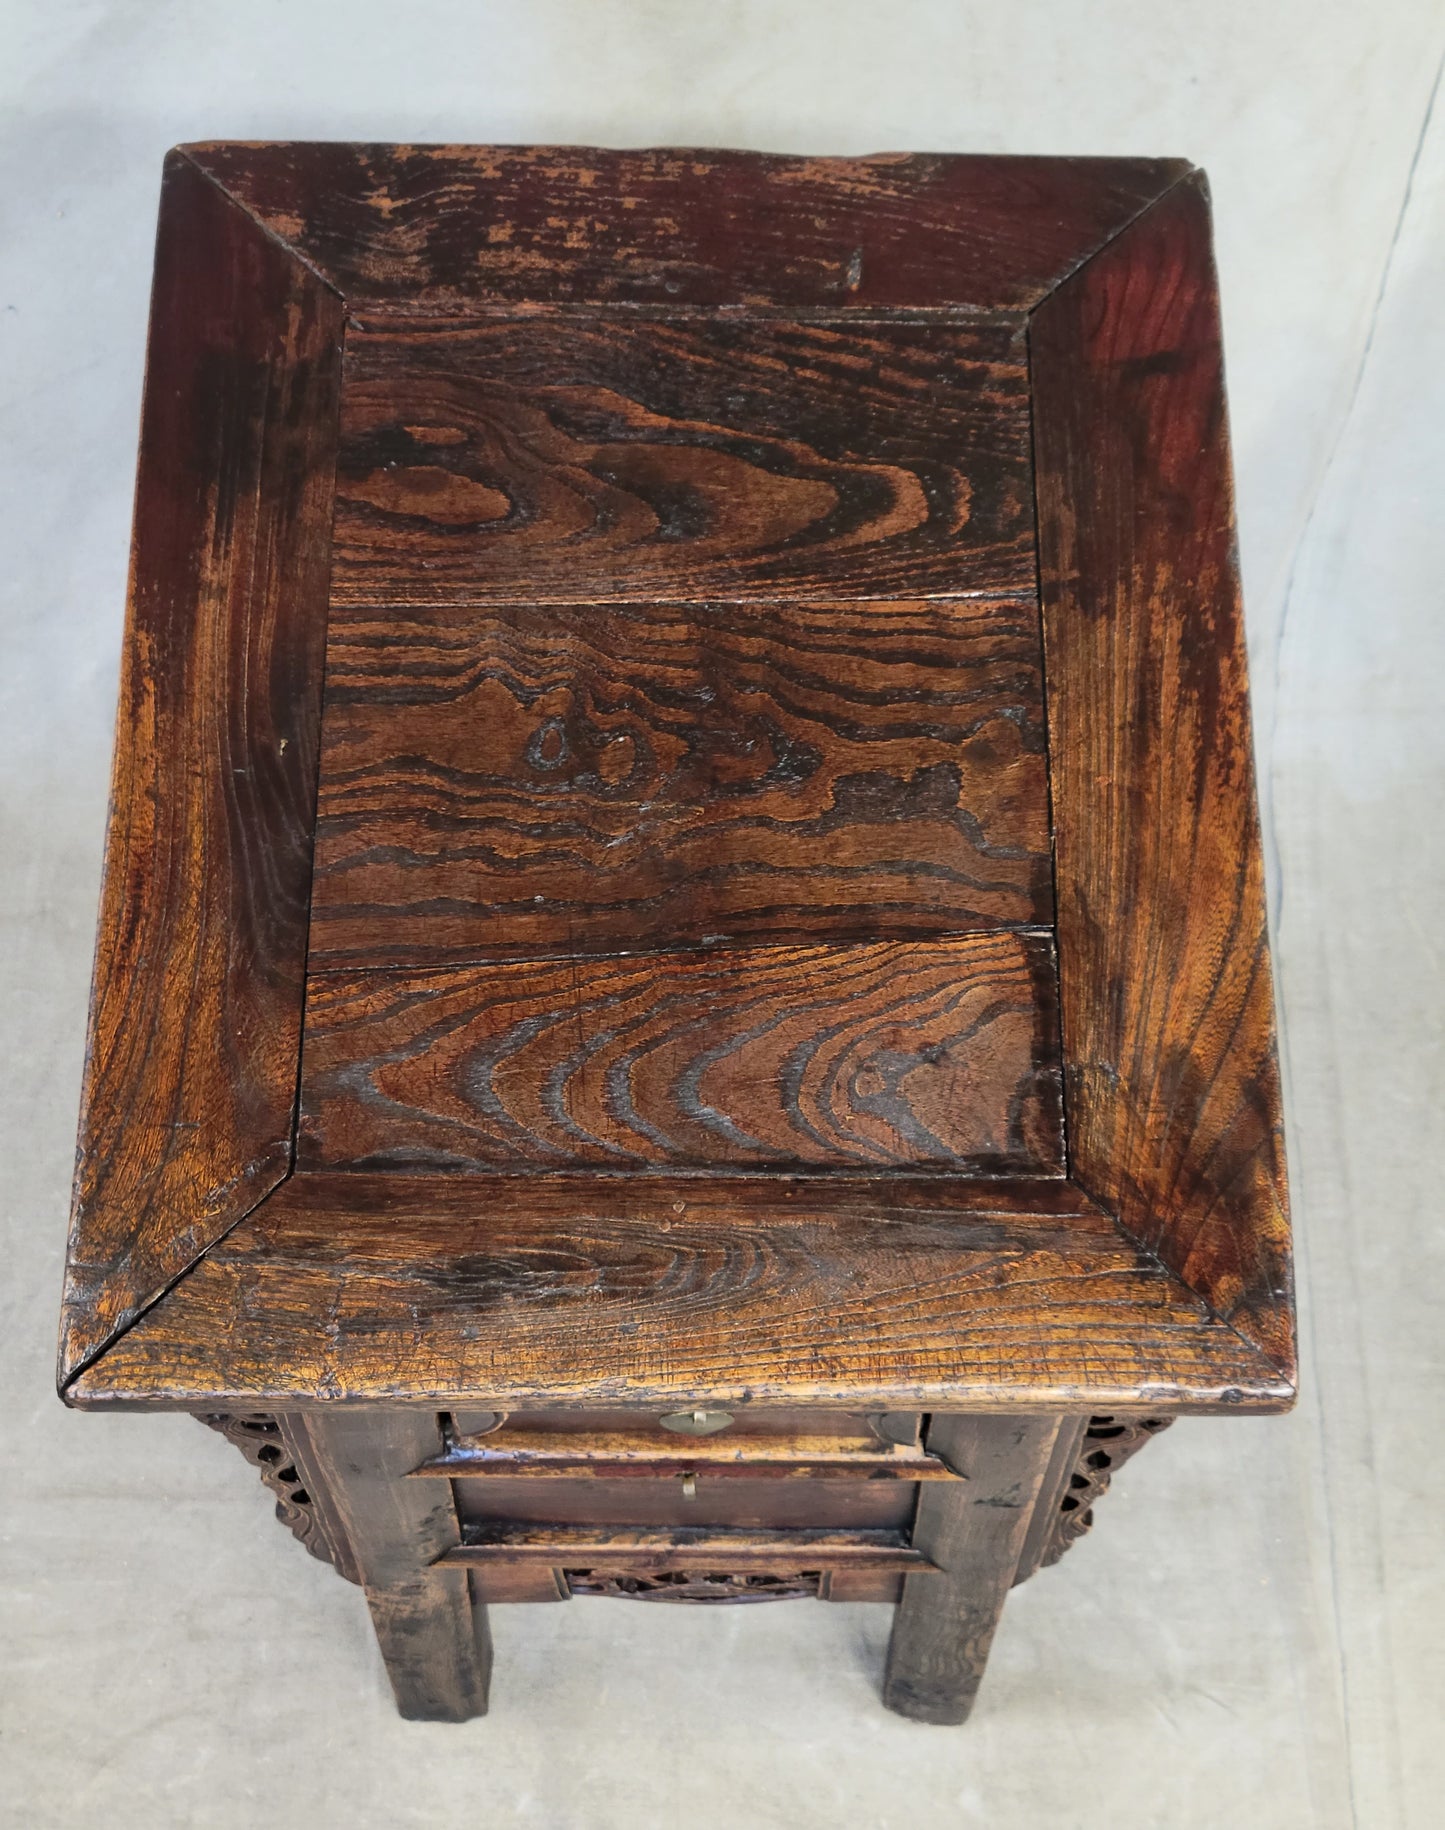 Antique Chinese Elm Side Tables / Altar Tables - a Near Pair